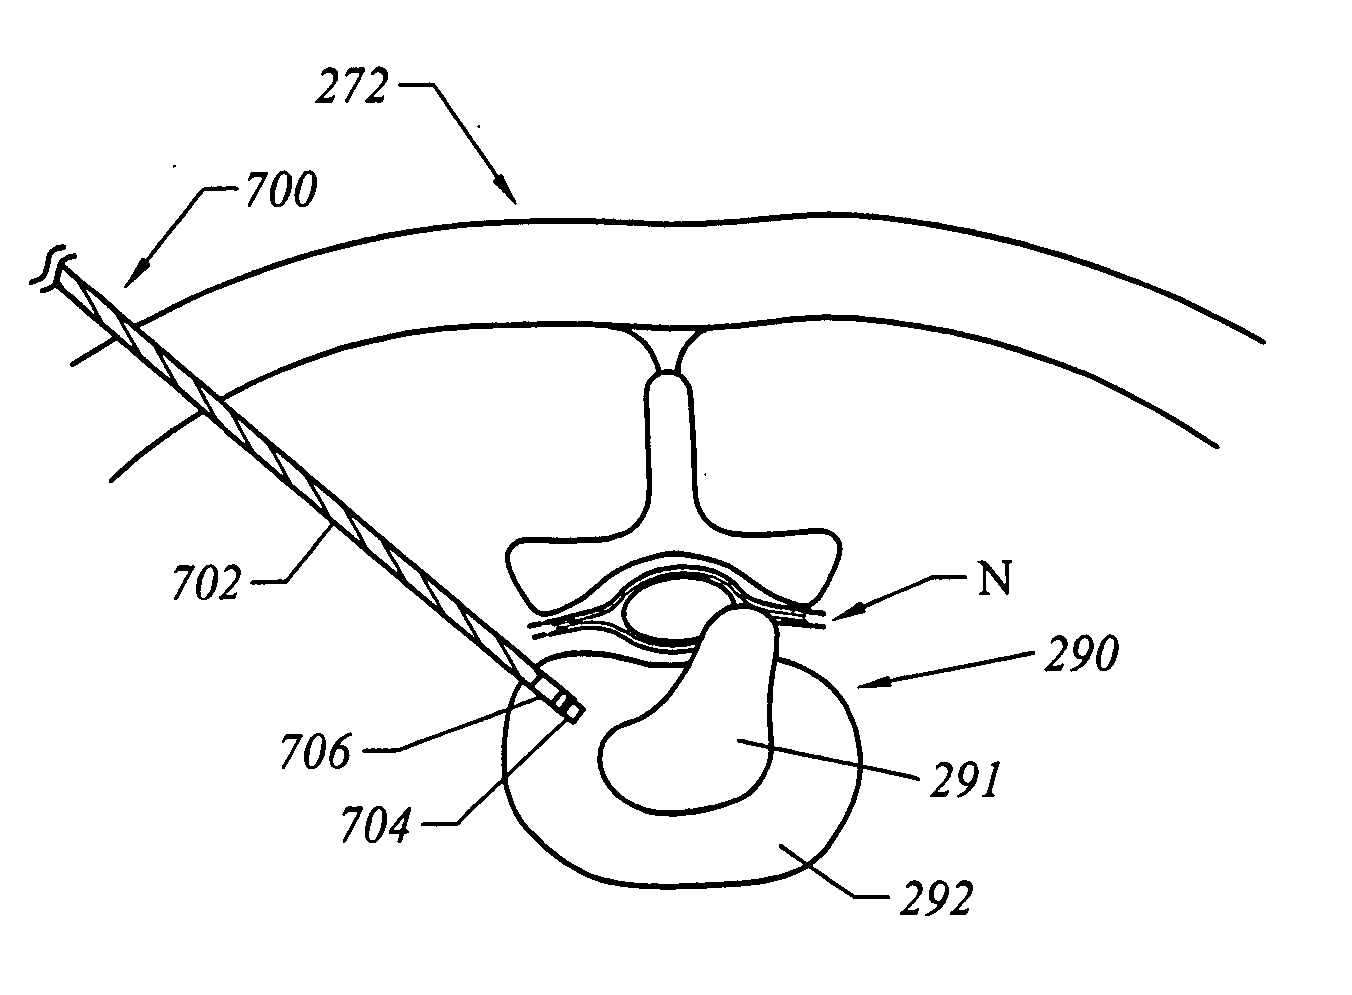 Methods for electrosurgical treatment of spinal tissue